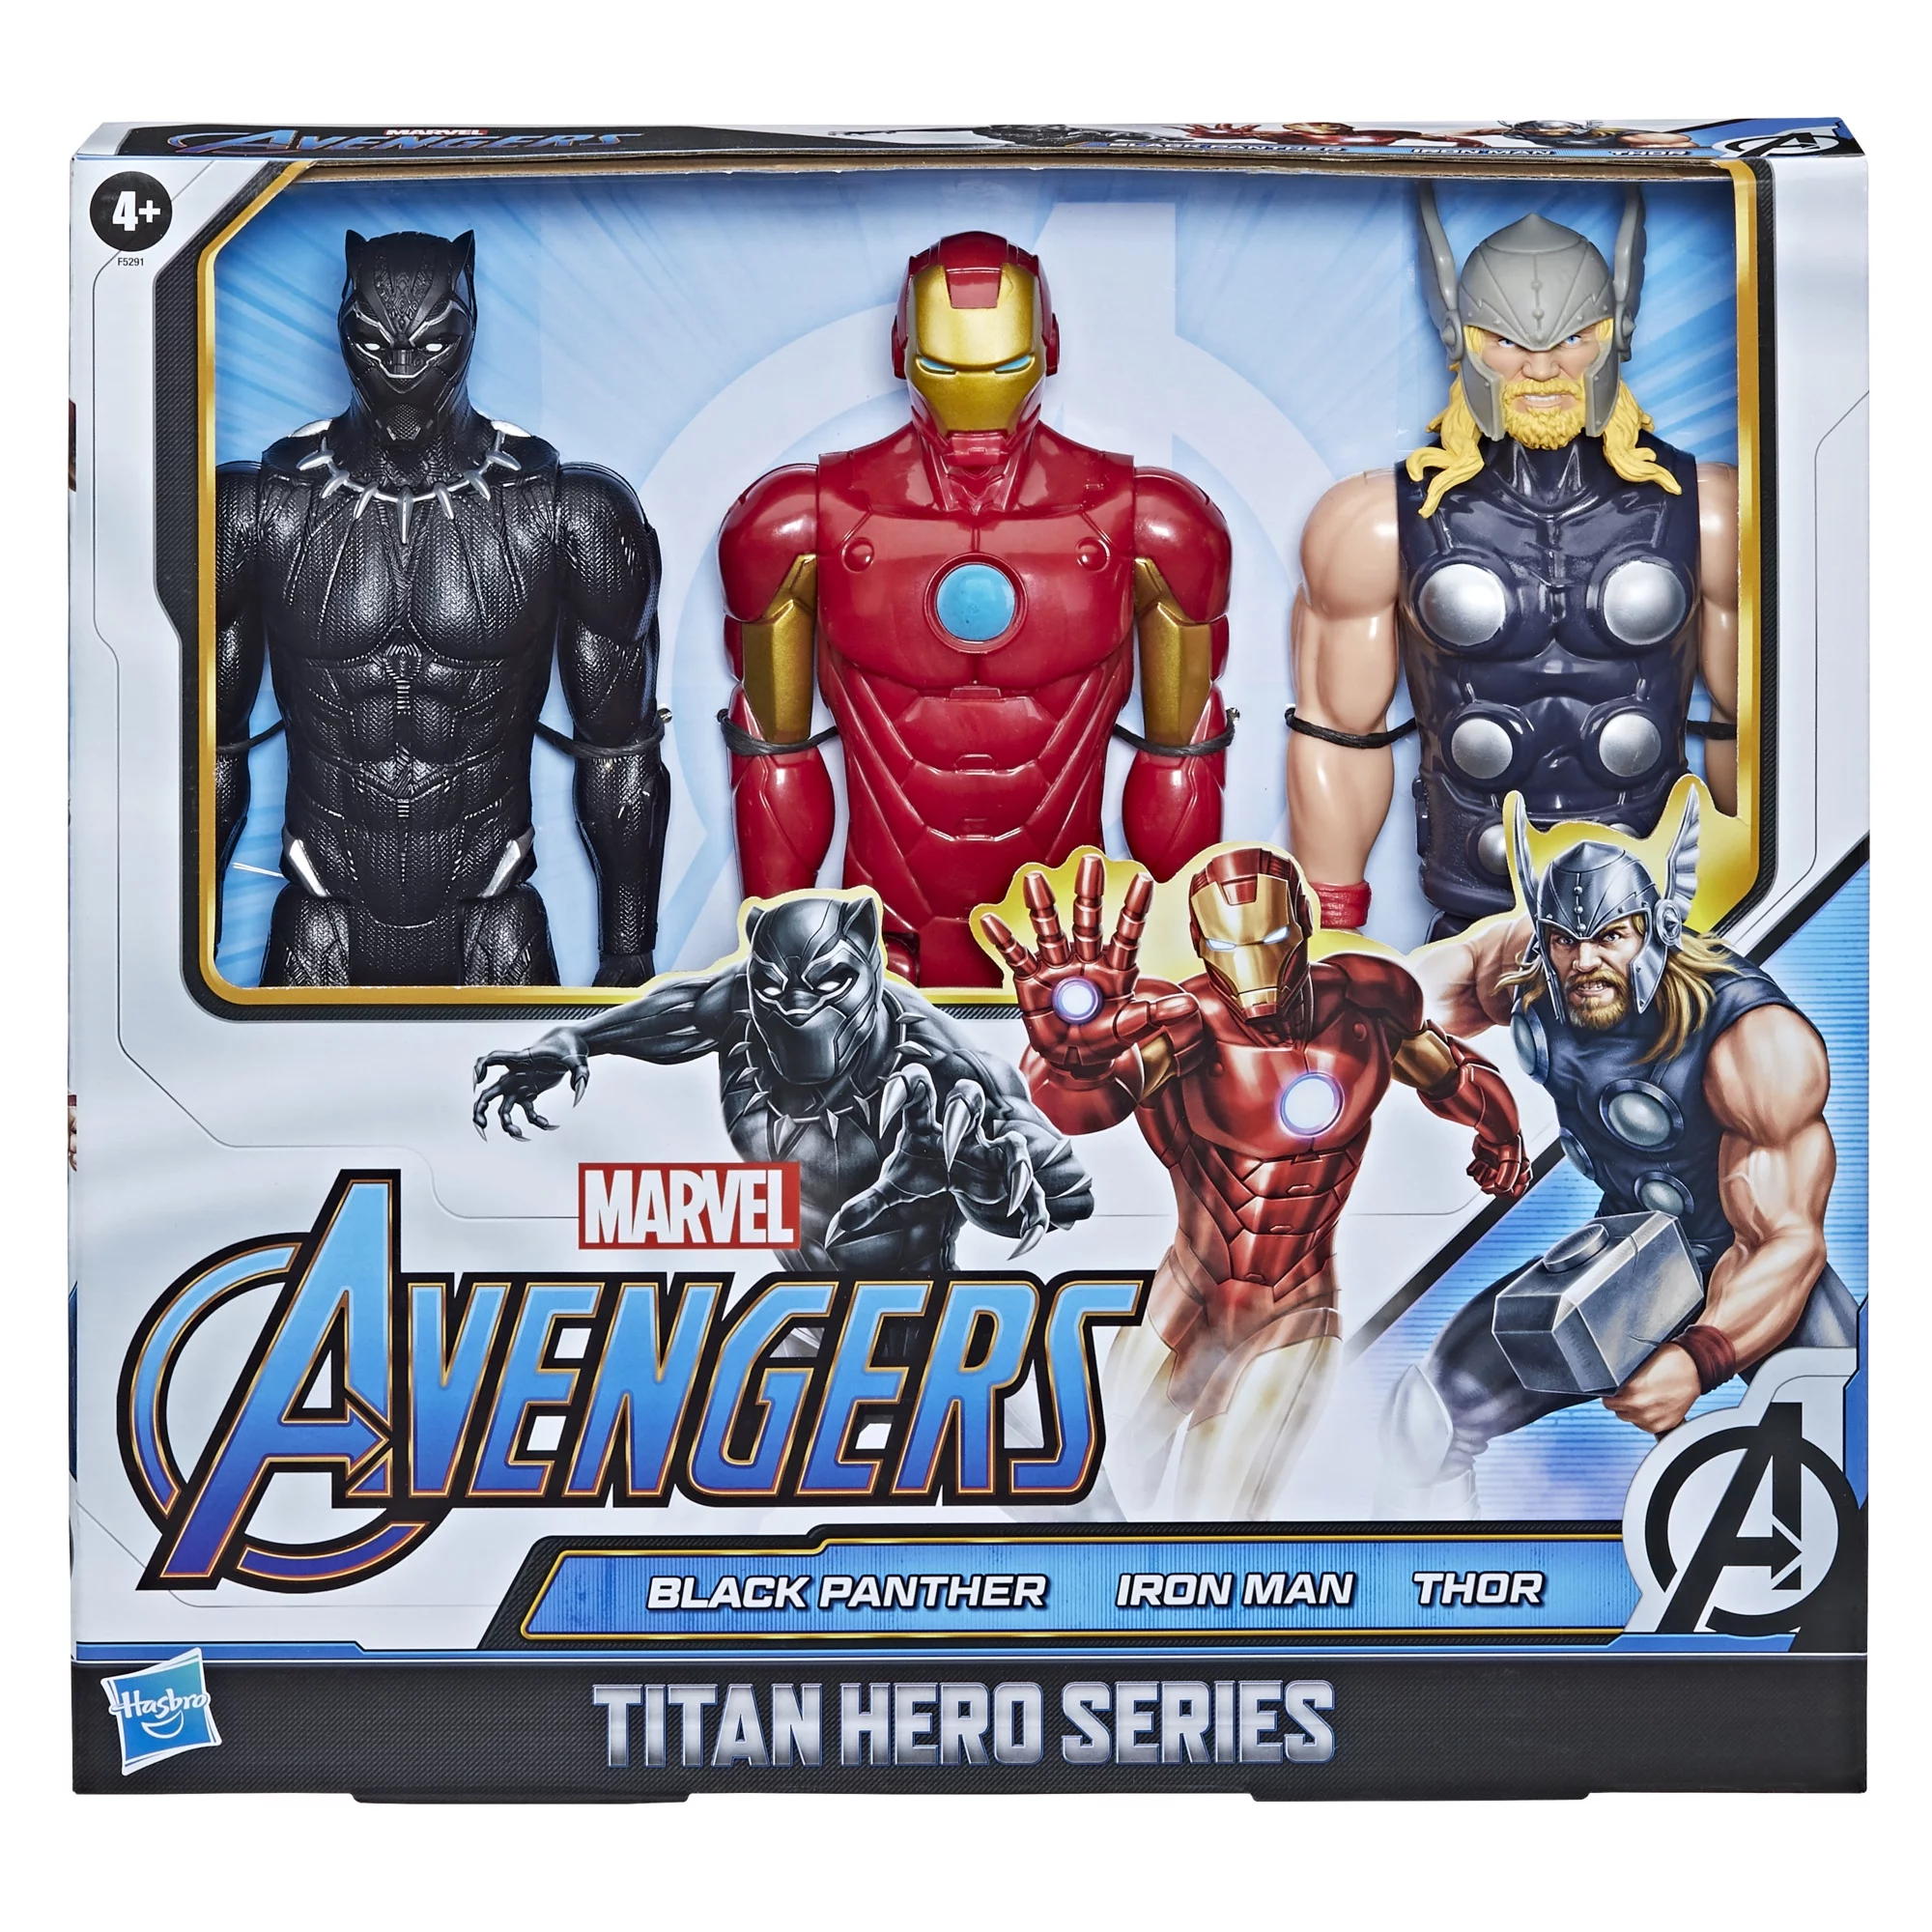 Marvel: Avengers Titan Hero Series Black Panther, Thor, and Iron Man Kids Toy Action Figure for Boys and Girls Ages 4 5 6 7 8 and Up